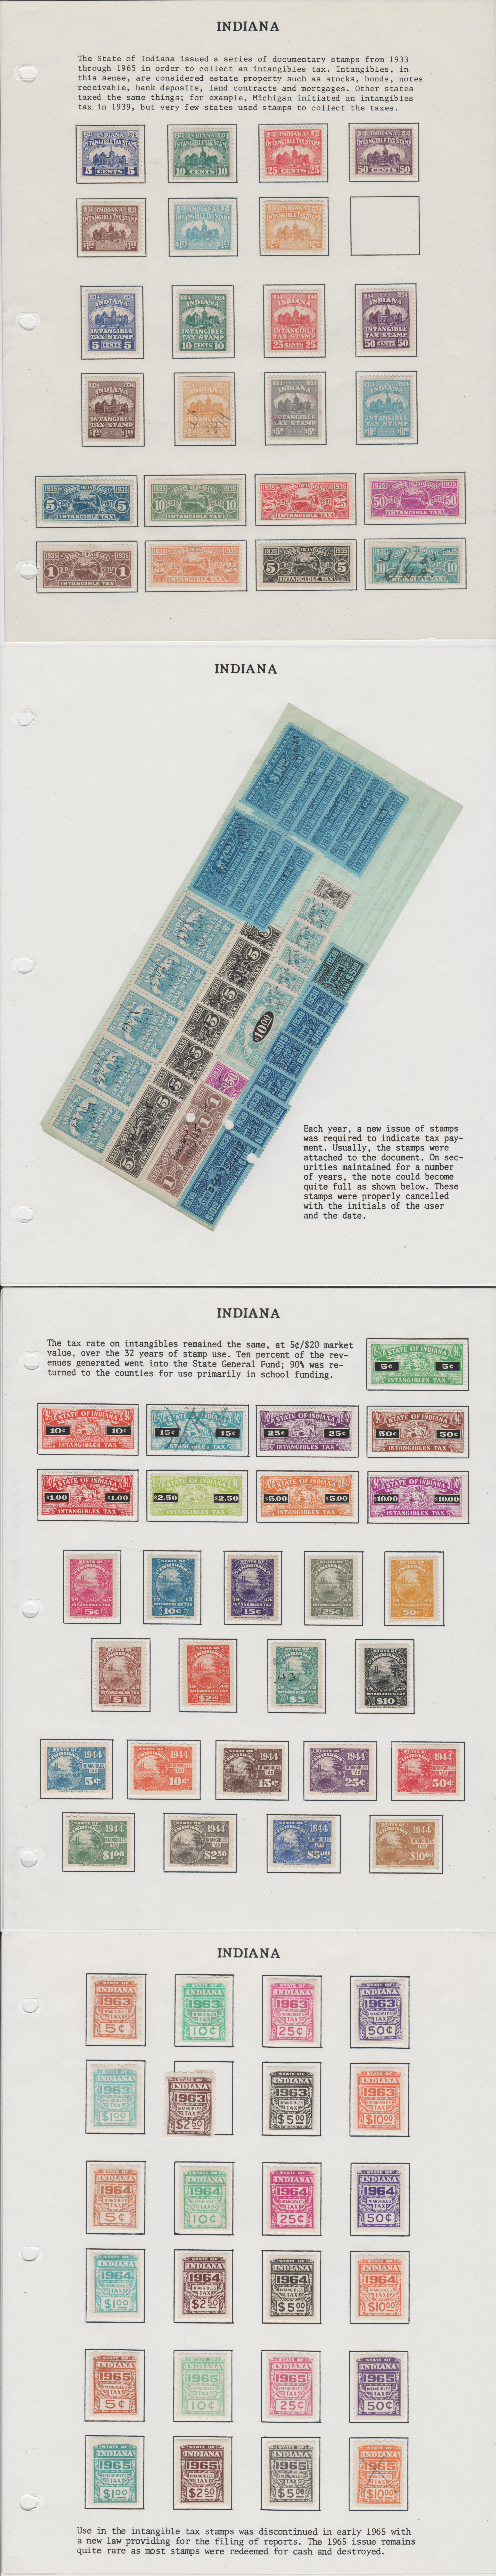 IN documentary D1-D289 COMPLETE collection of every major numbered intangible issued 1933 through 1965, all neatly mounted on 16 pages. There are several examples of usage on various documents, including a stock certificate with $128.10 face in stamps from 1956 to 1964 (45 stamps). A truly unique offering. Cat value estimated at $1700. WP